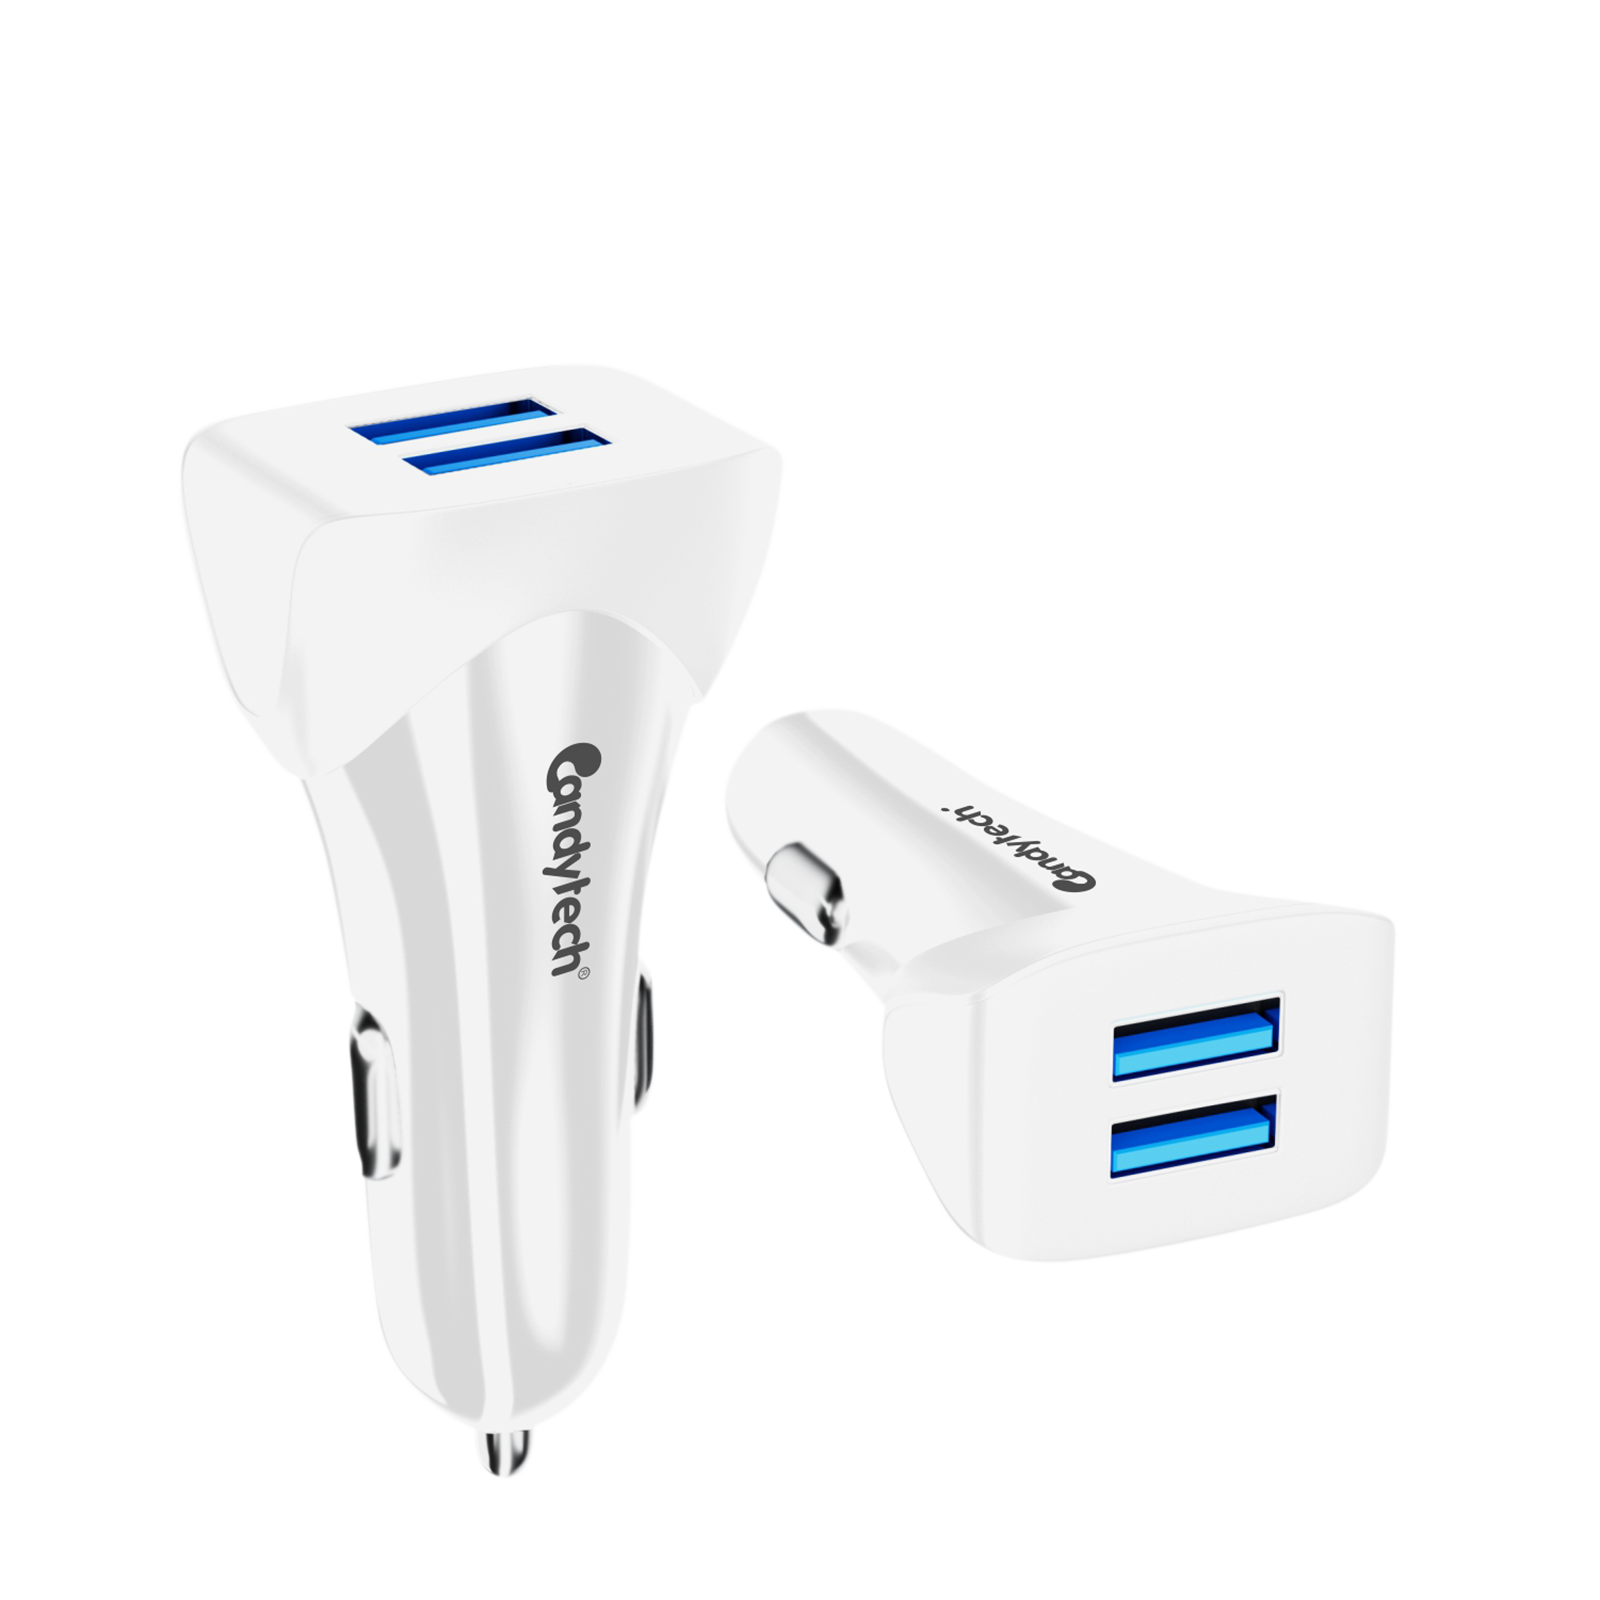 Candytech 3 Ampere 2 USB Ports Car Charging Adapter (Super Fast Charging, CC-15, White)